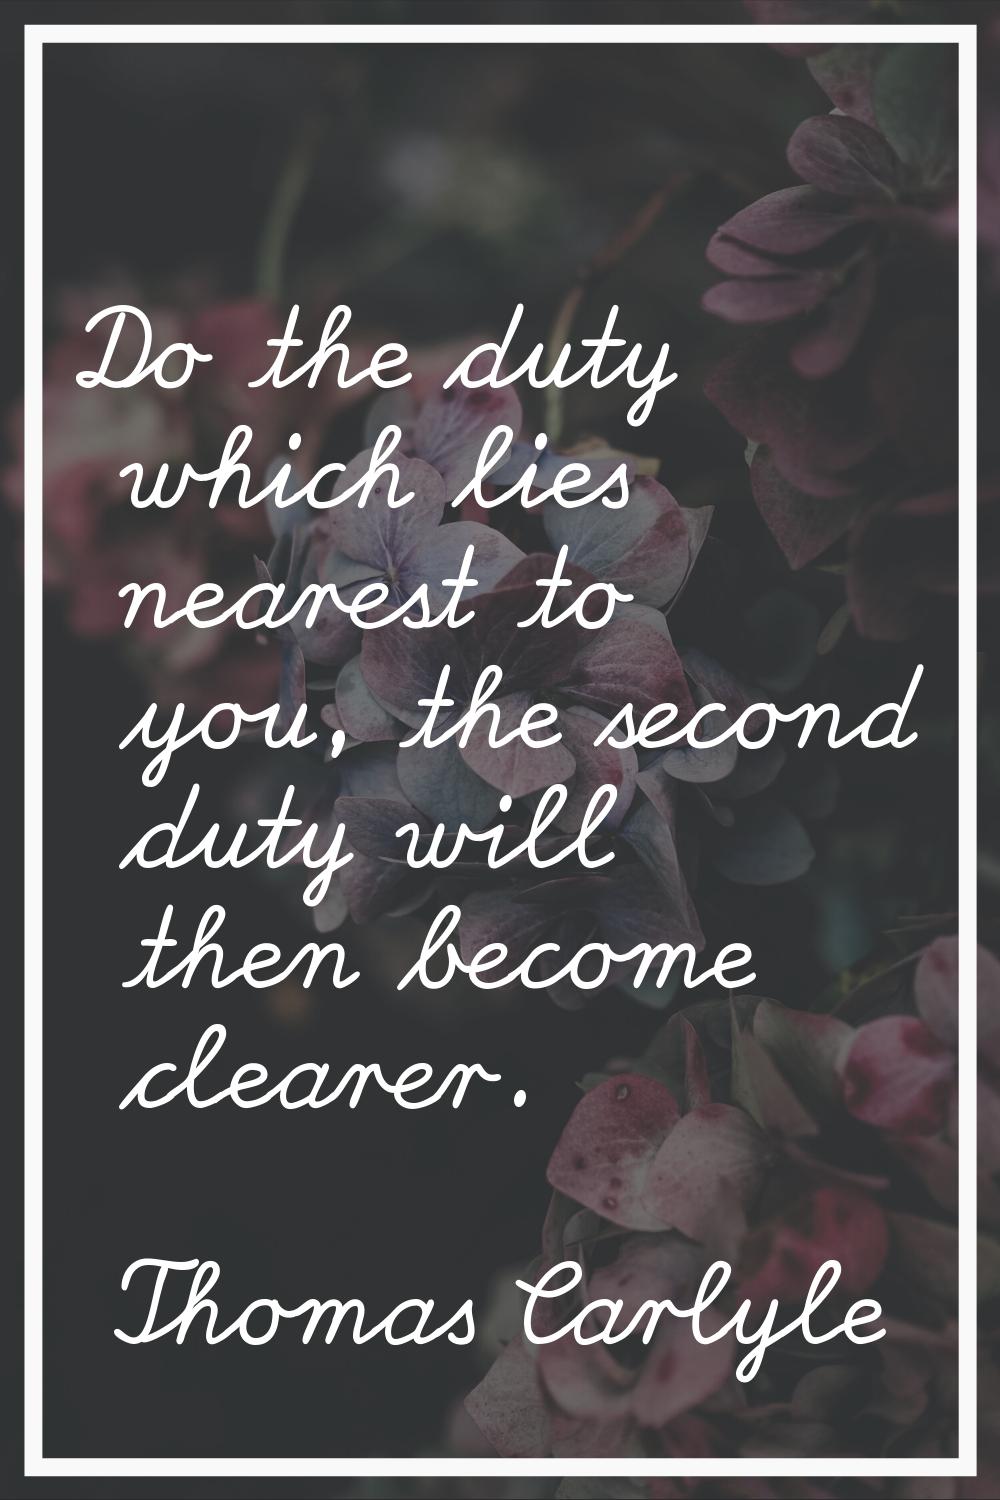 Do the duty which lies nearest to you, the second duty will then become clearer.